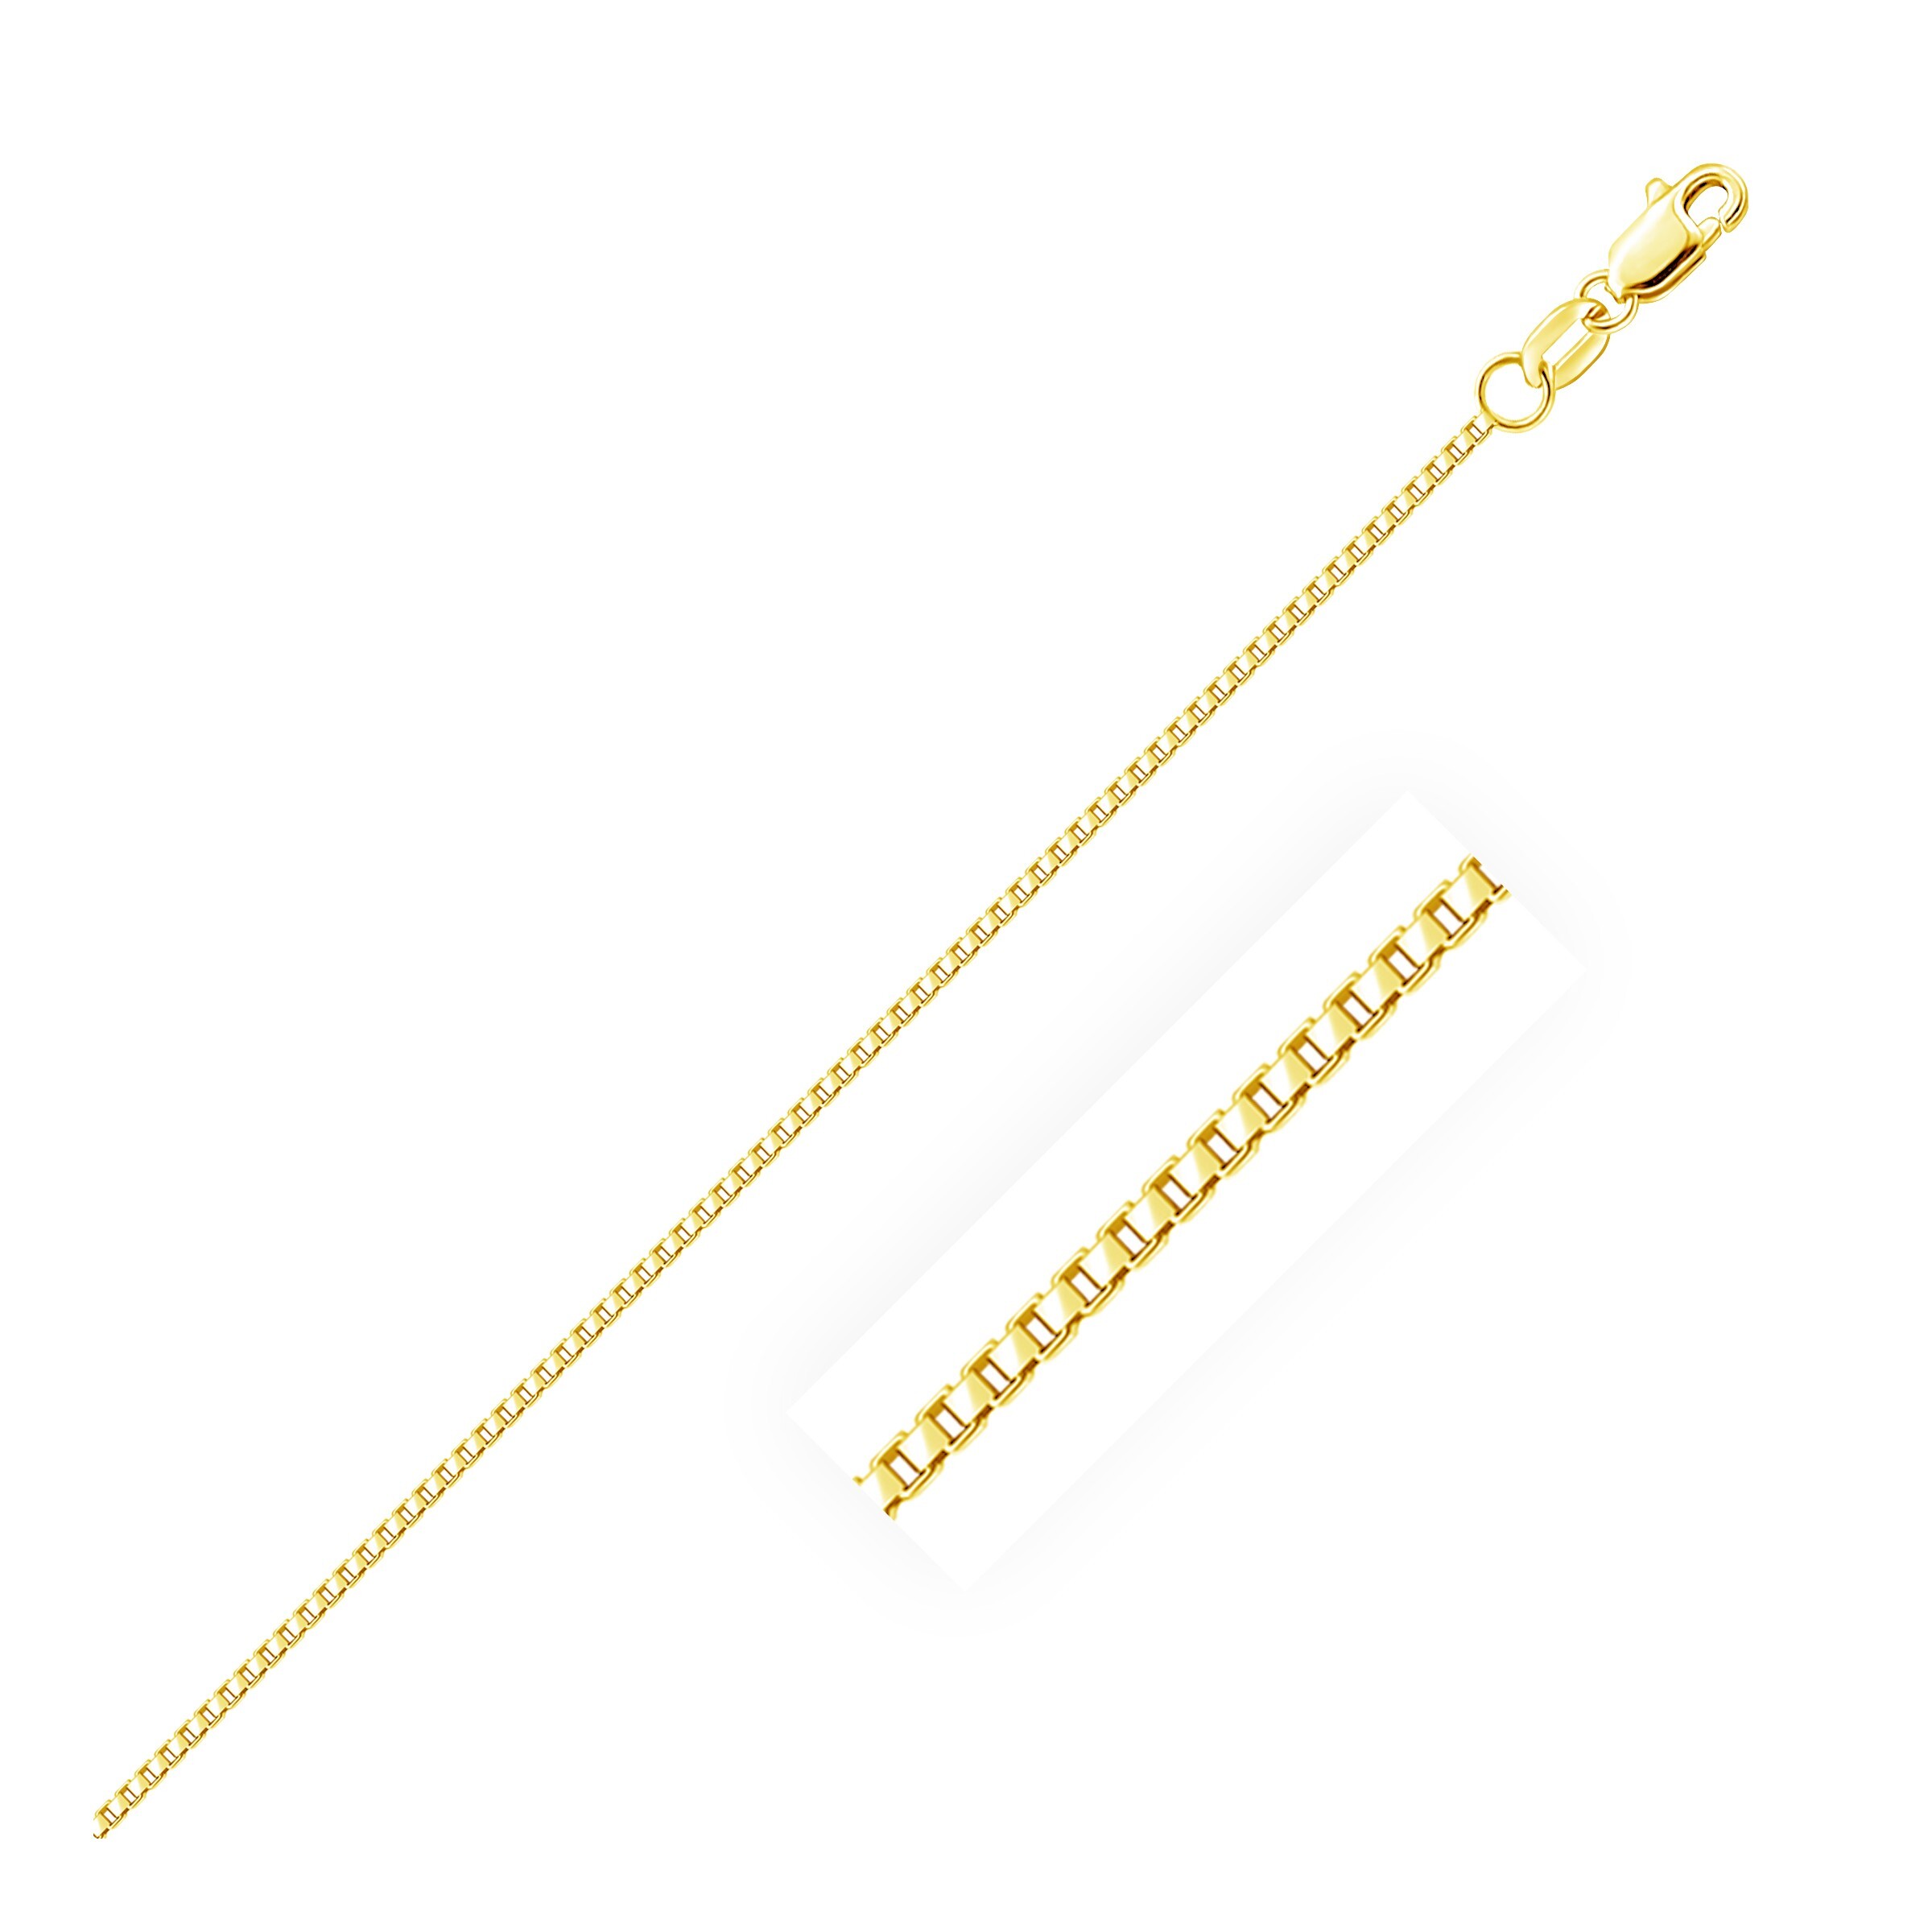 10K Solid Yellow Gold Mariner Link Chain 1.2mm 16/" 18/" 20/" 24/"